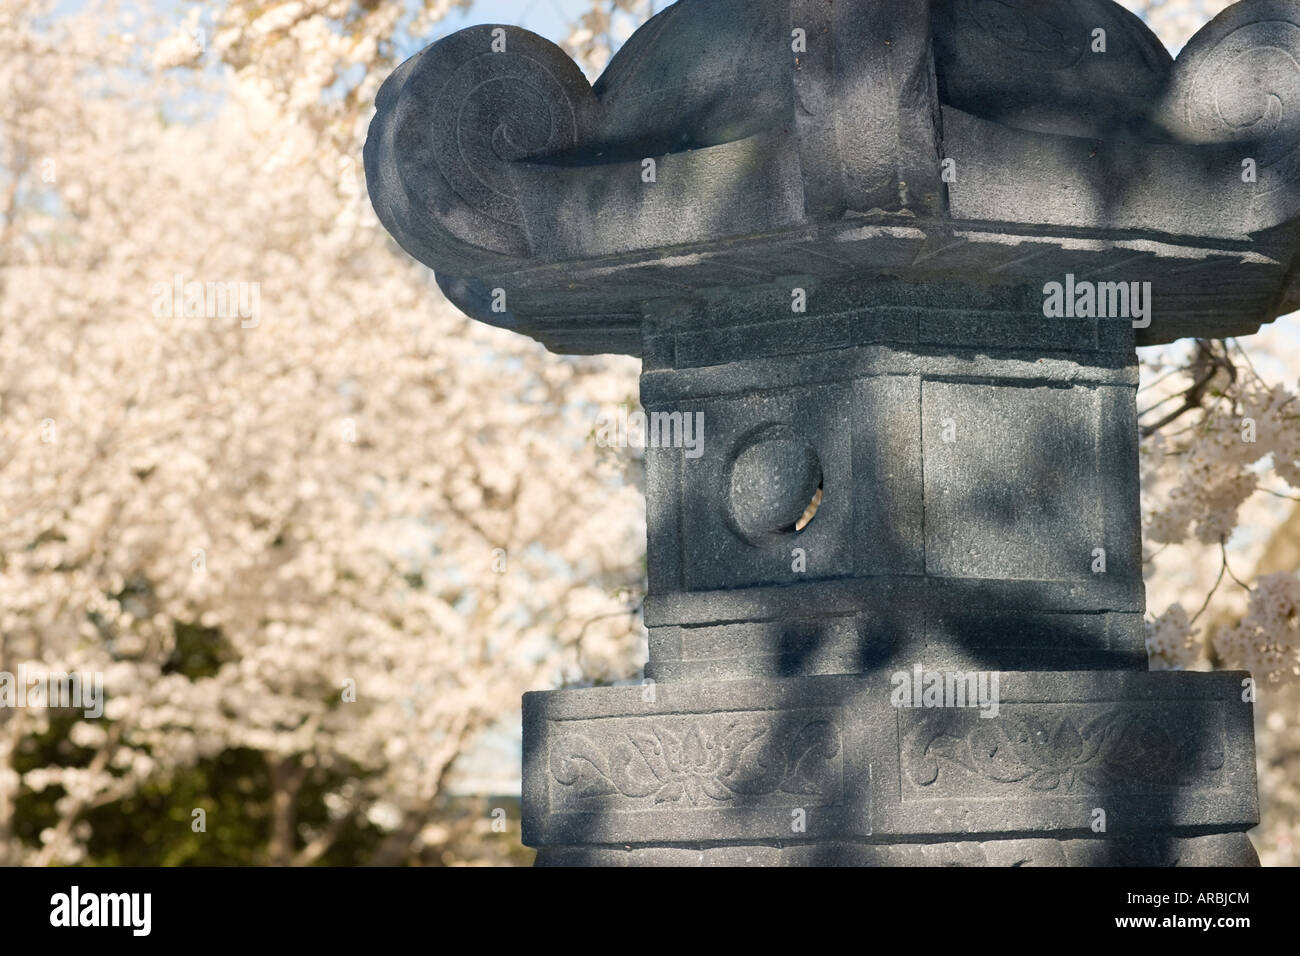 The Japanese Lantern with cherry blossoms in spring. National Cherry Blossom Festival, Tidal Basin, Washington DC Stock Photo